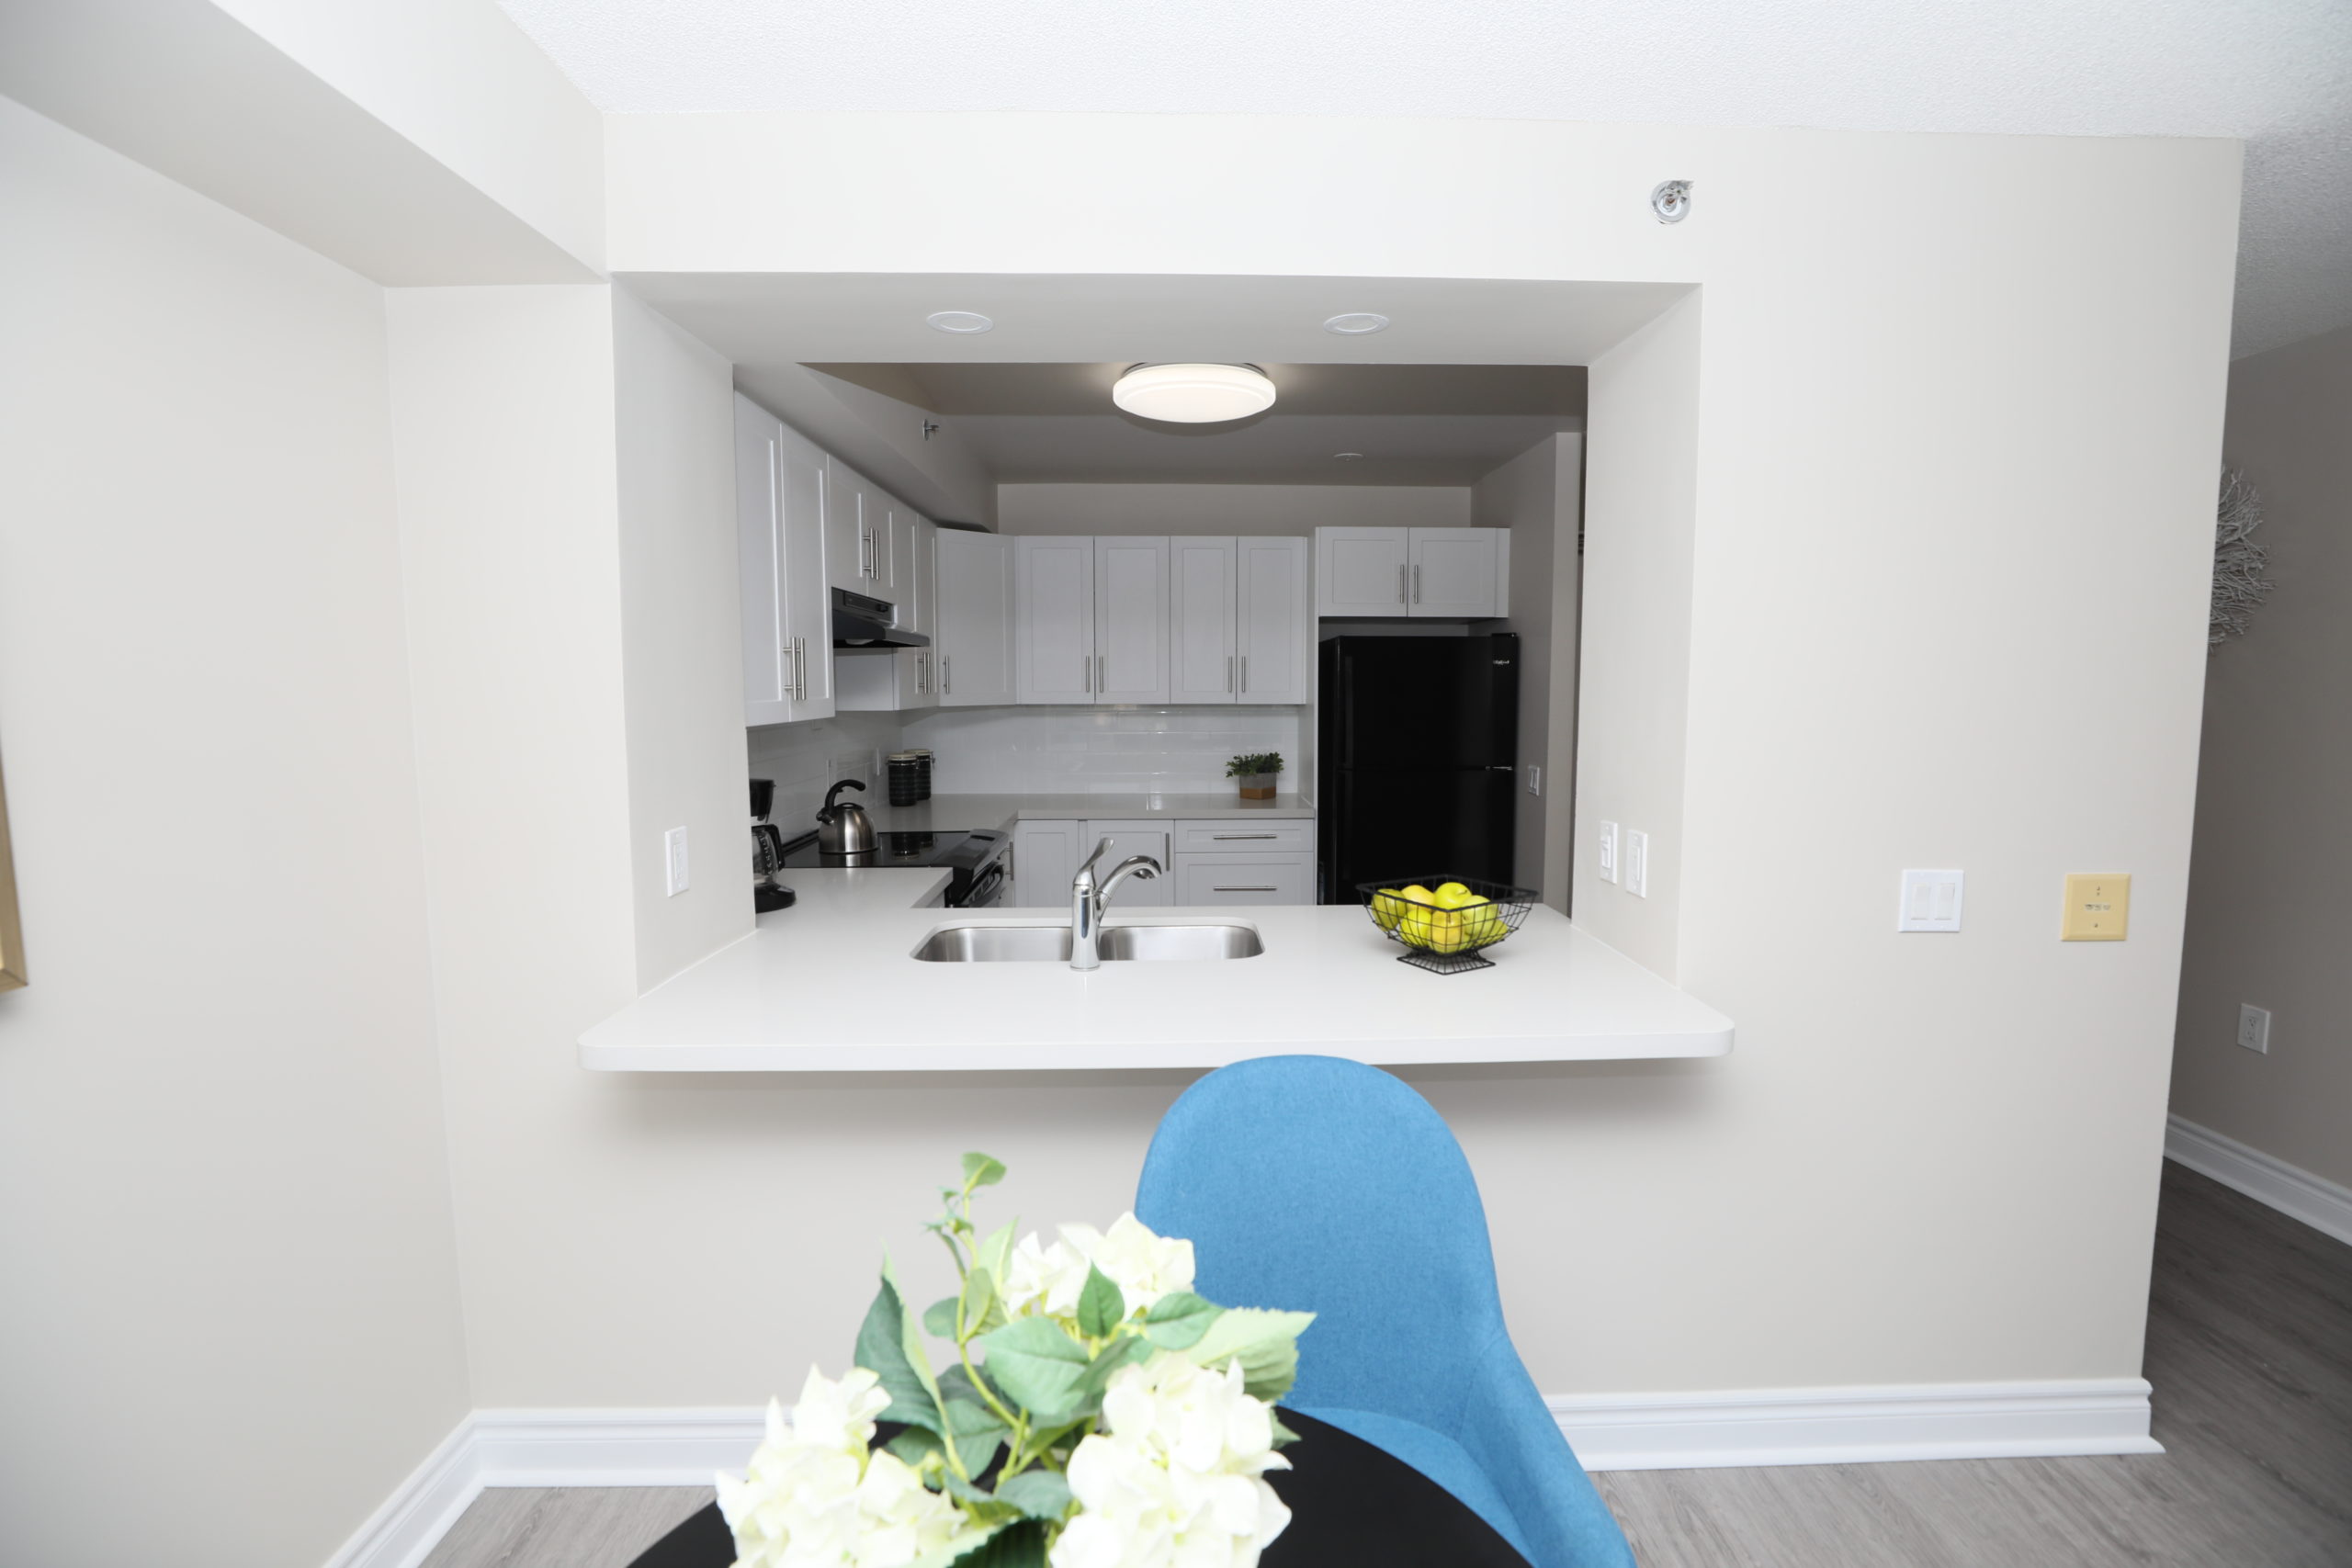 image of suite showing kitchen view 2